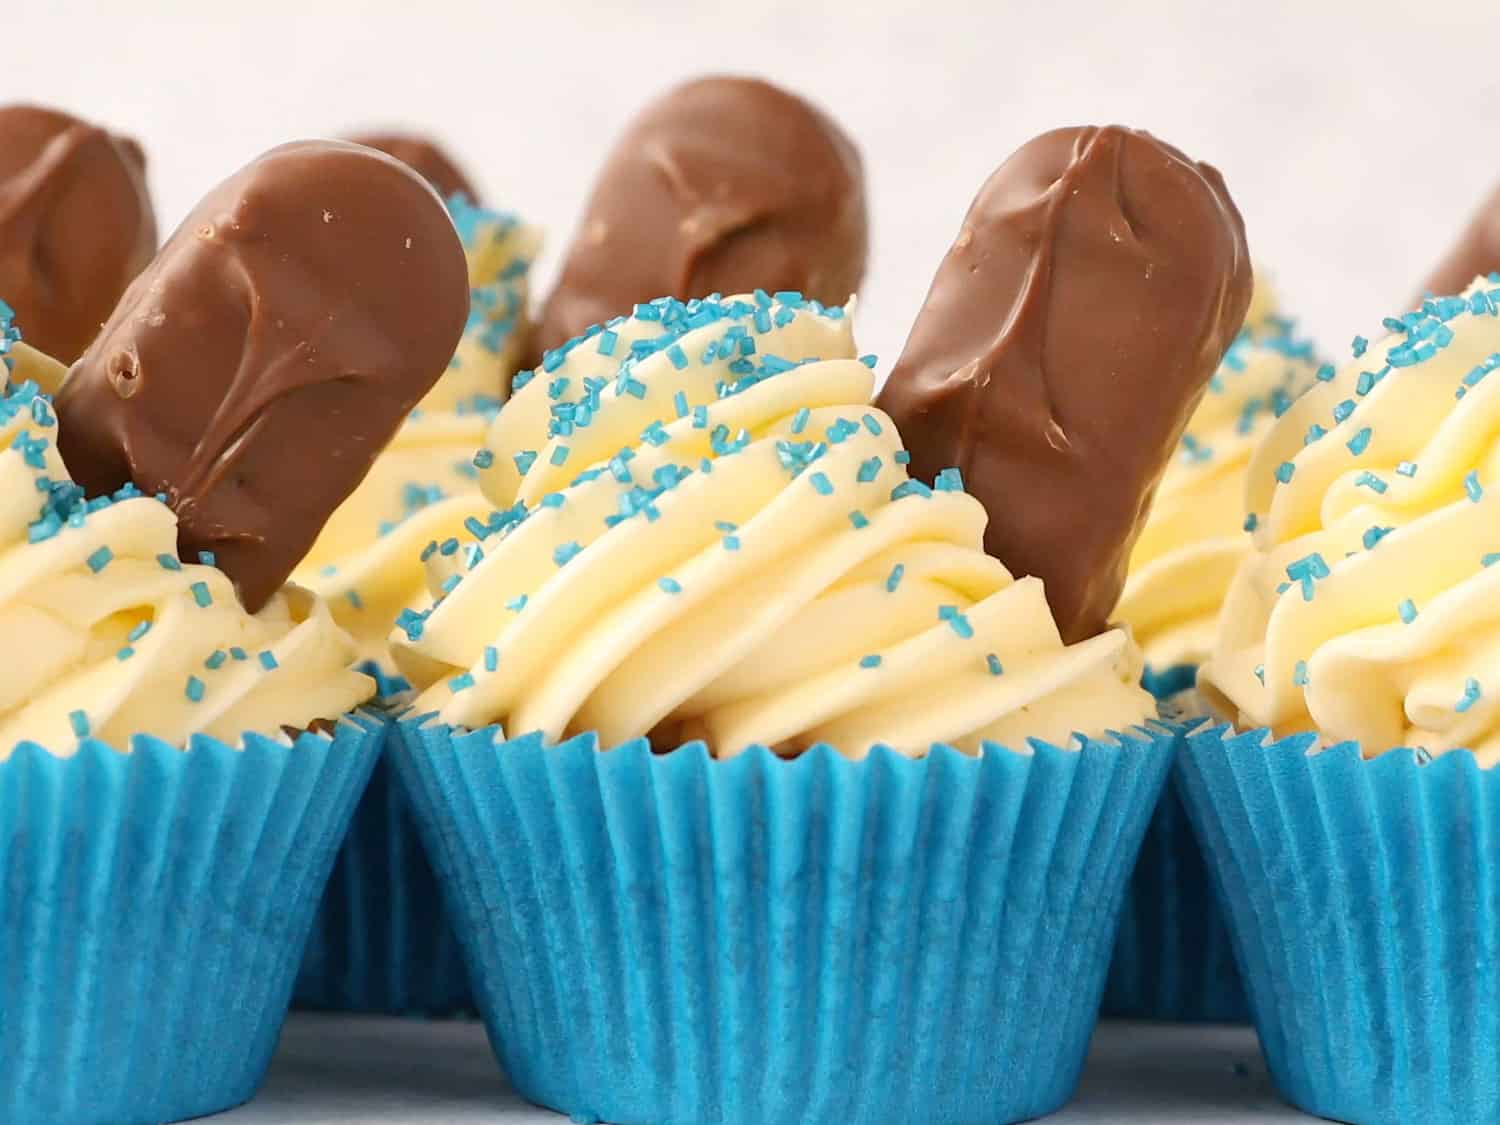 A row of cupcakes in blue cupcake cases, the cupcakes have been decorated with buttercream and a Bounty bar